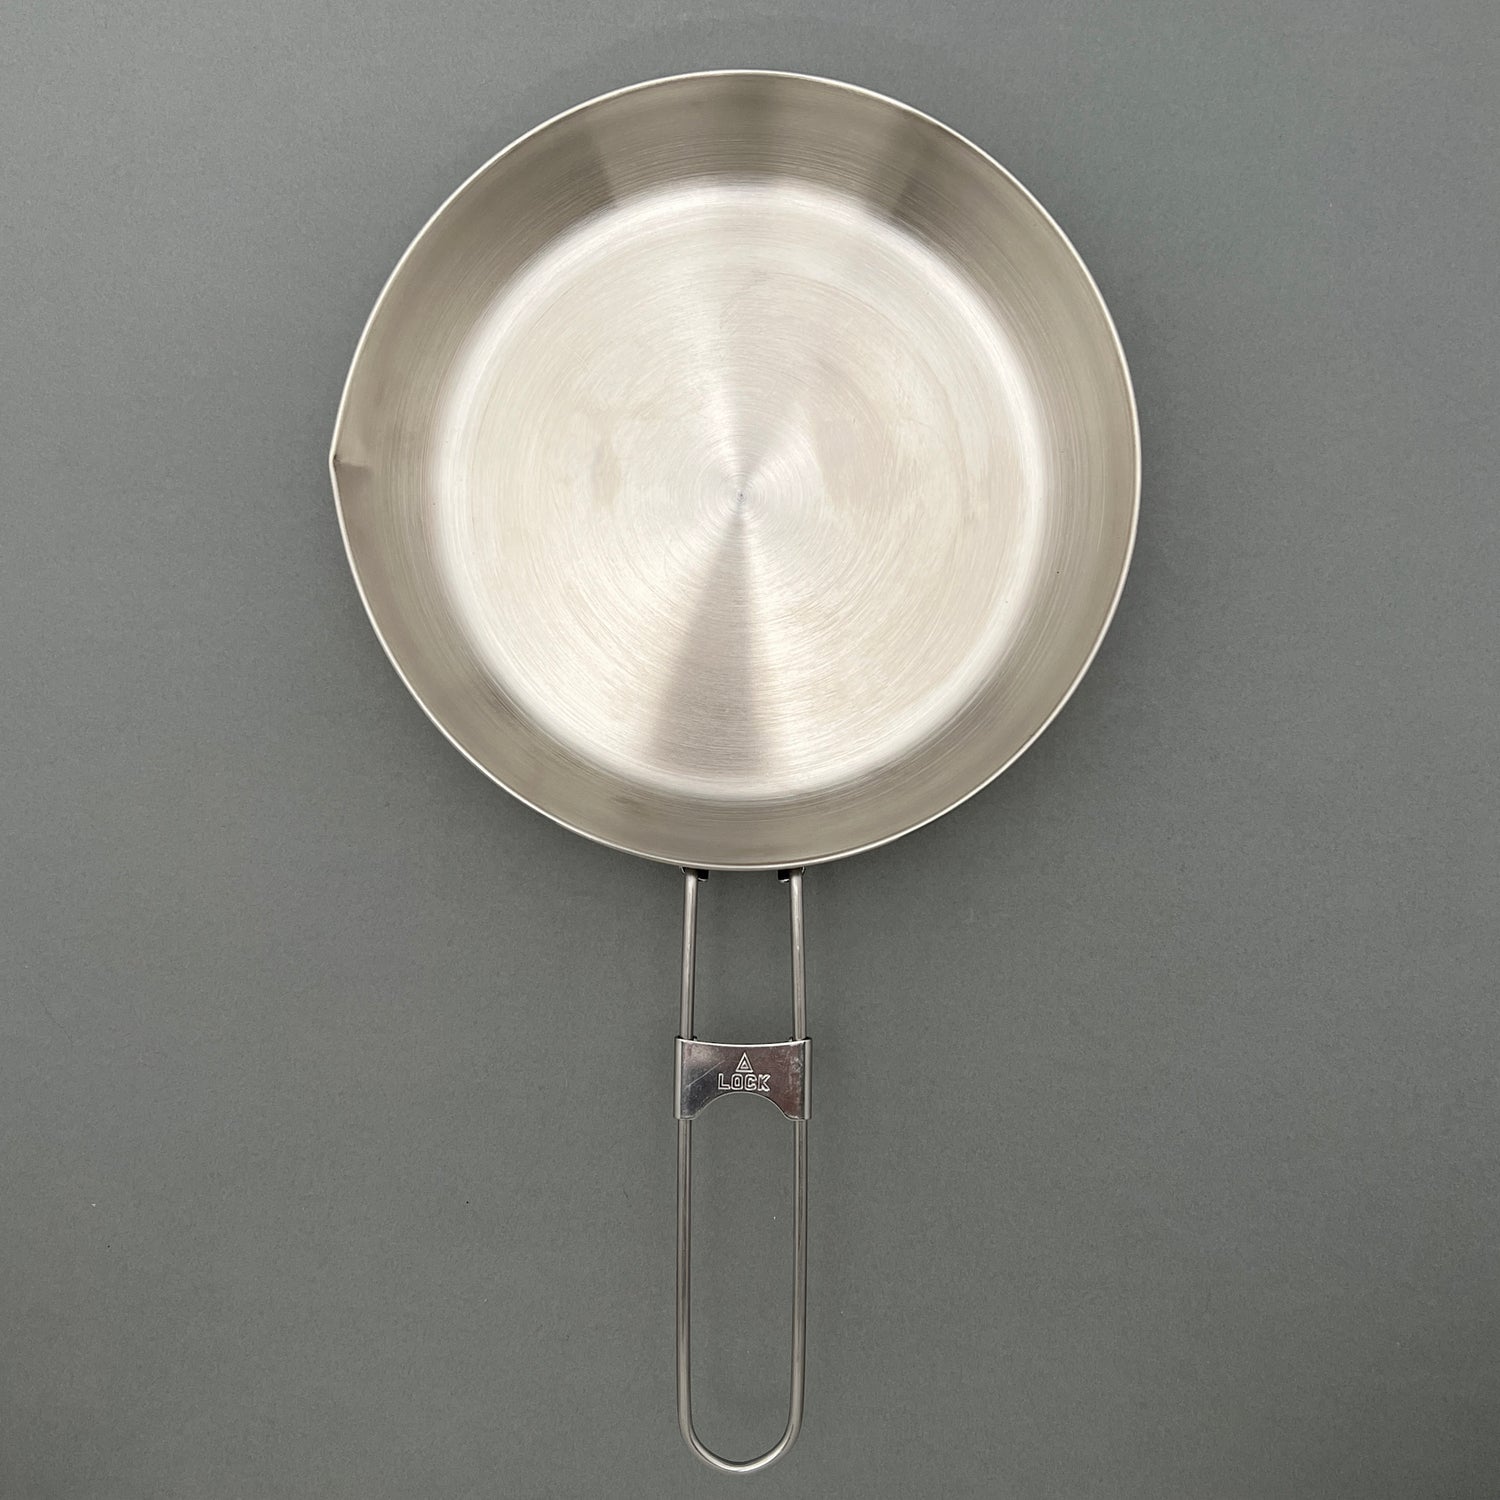 A stainless steel fry pan with a gray background